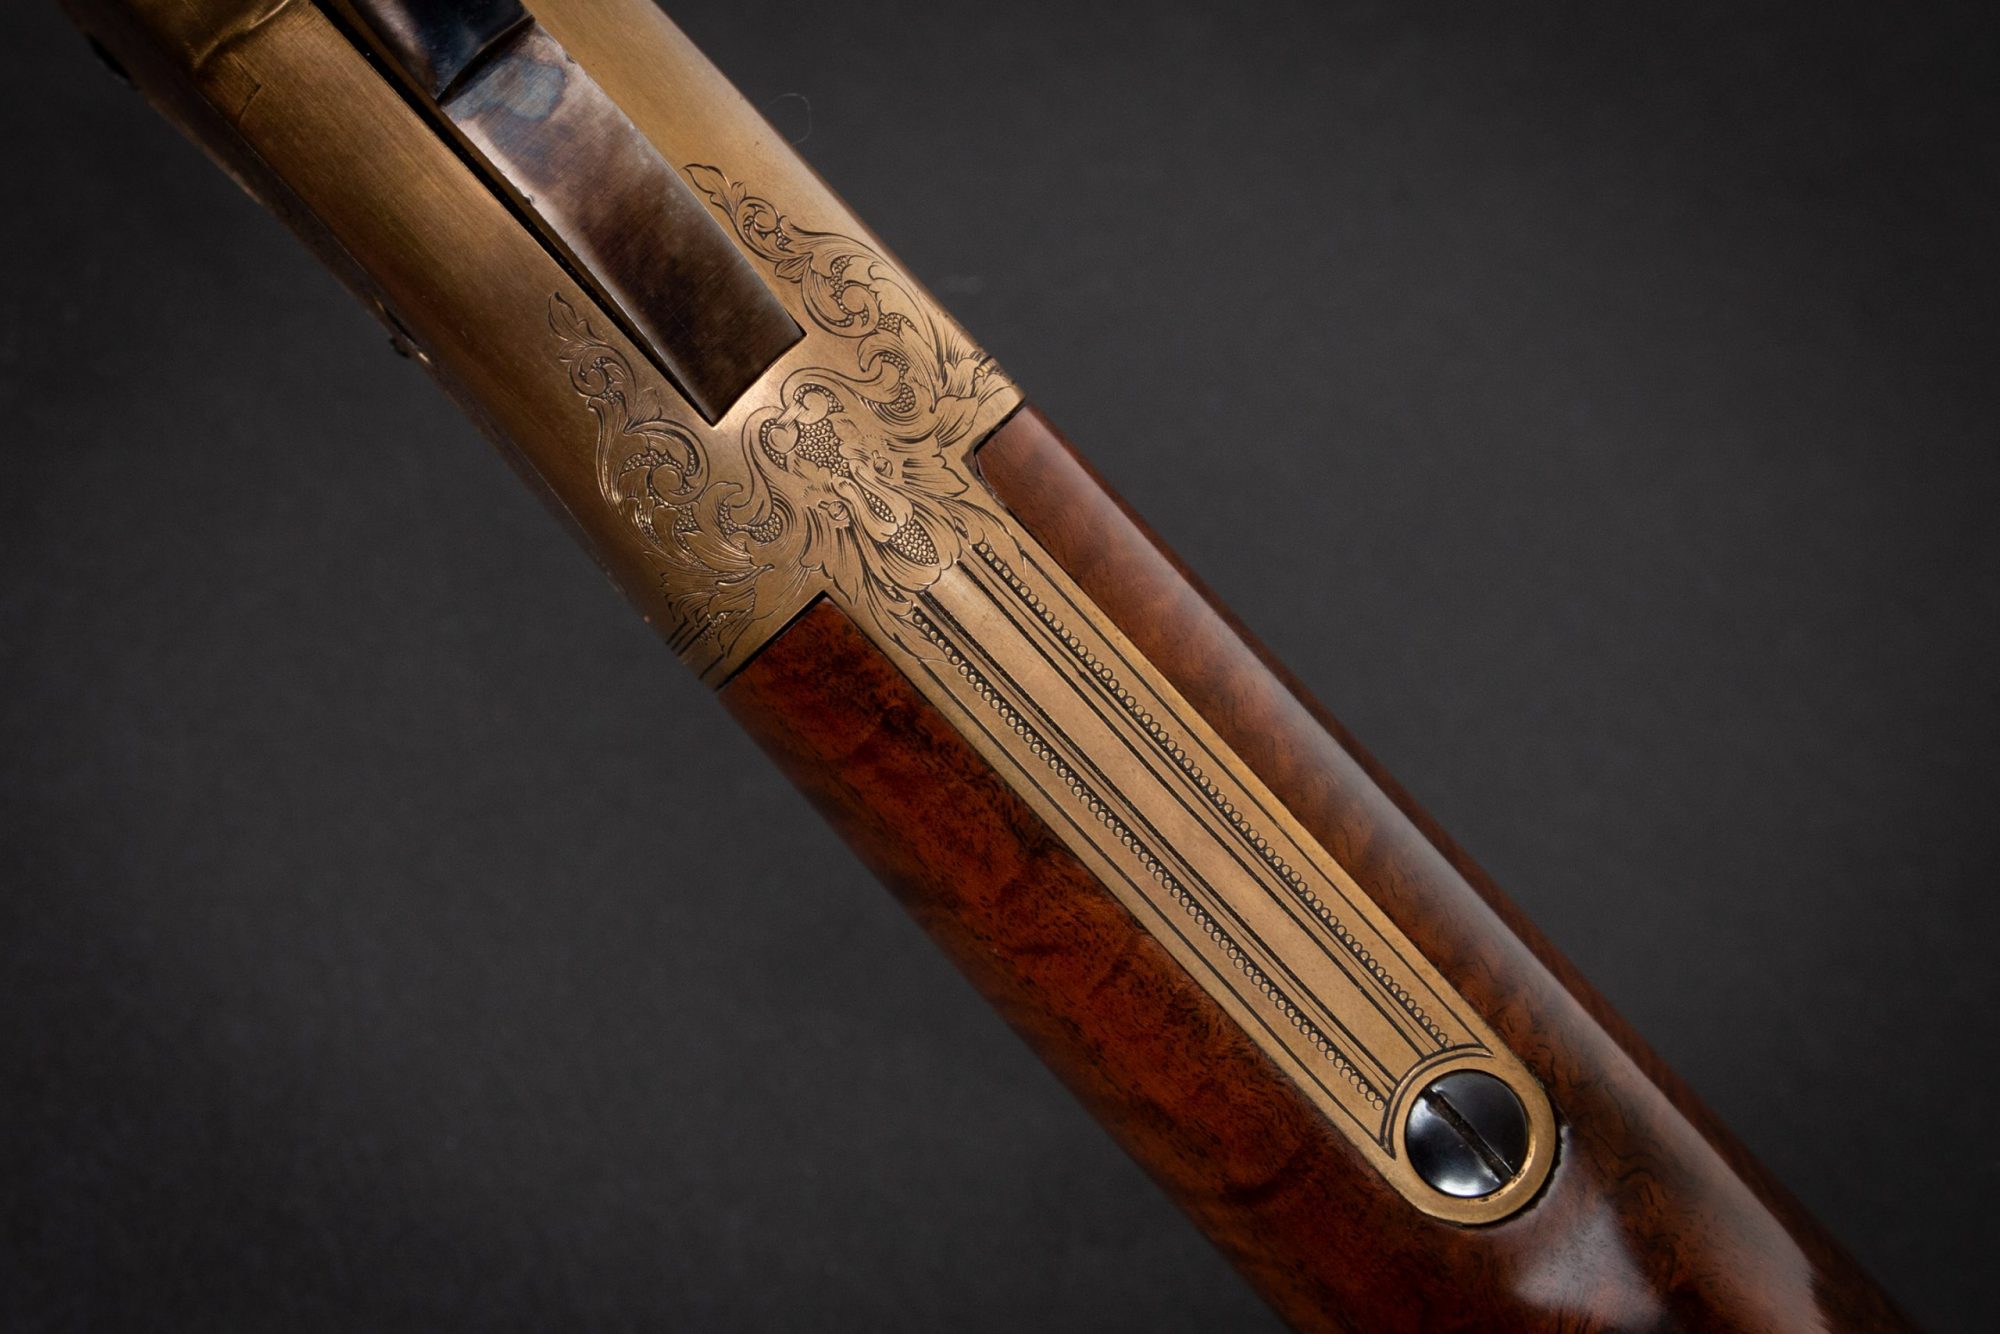 Close-up photo of a Navy Arms A. Uberti 1860 Henry, Engraved by FEGA Master Lee Griffiths, sold as-is by Turnbull Restoration